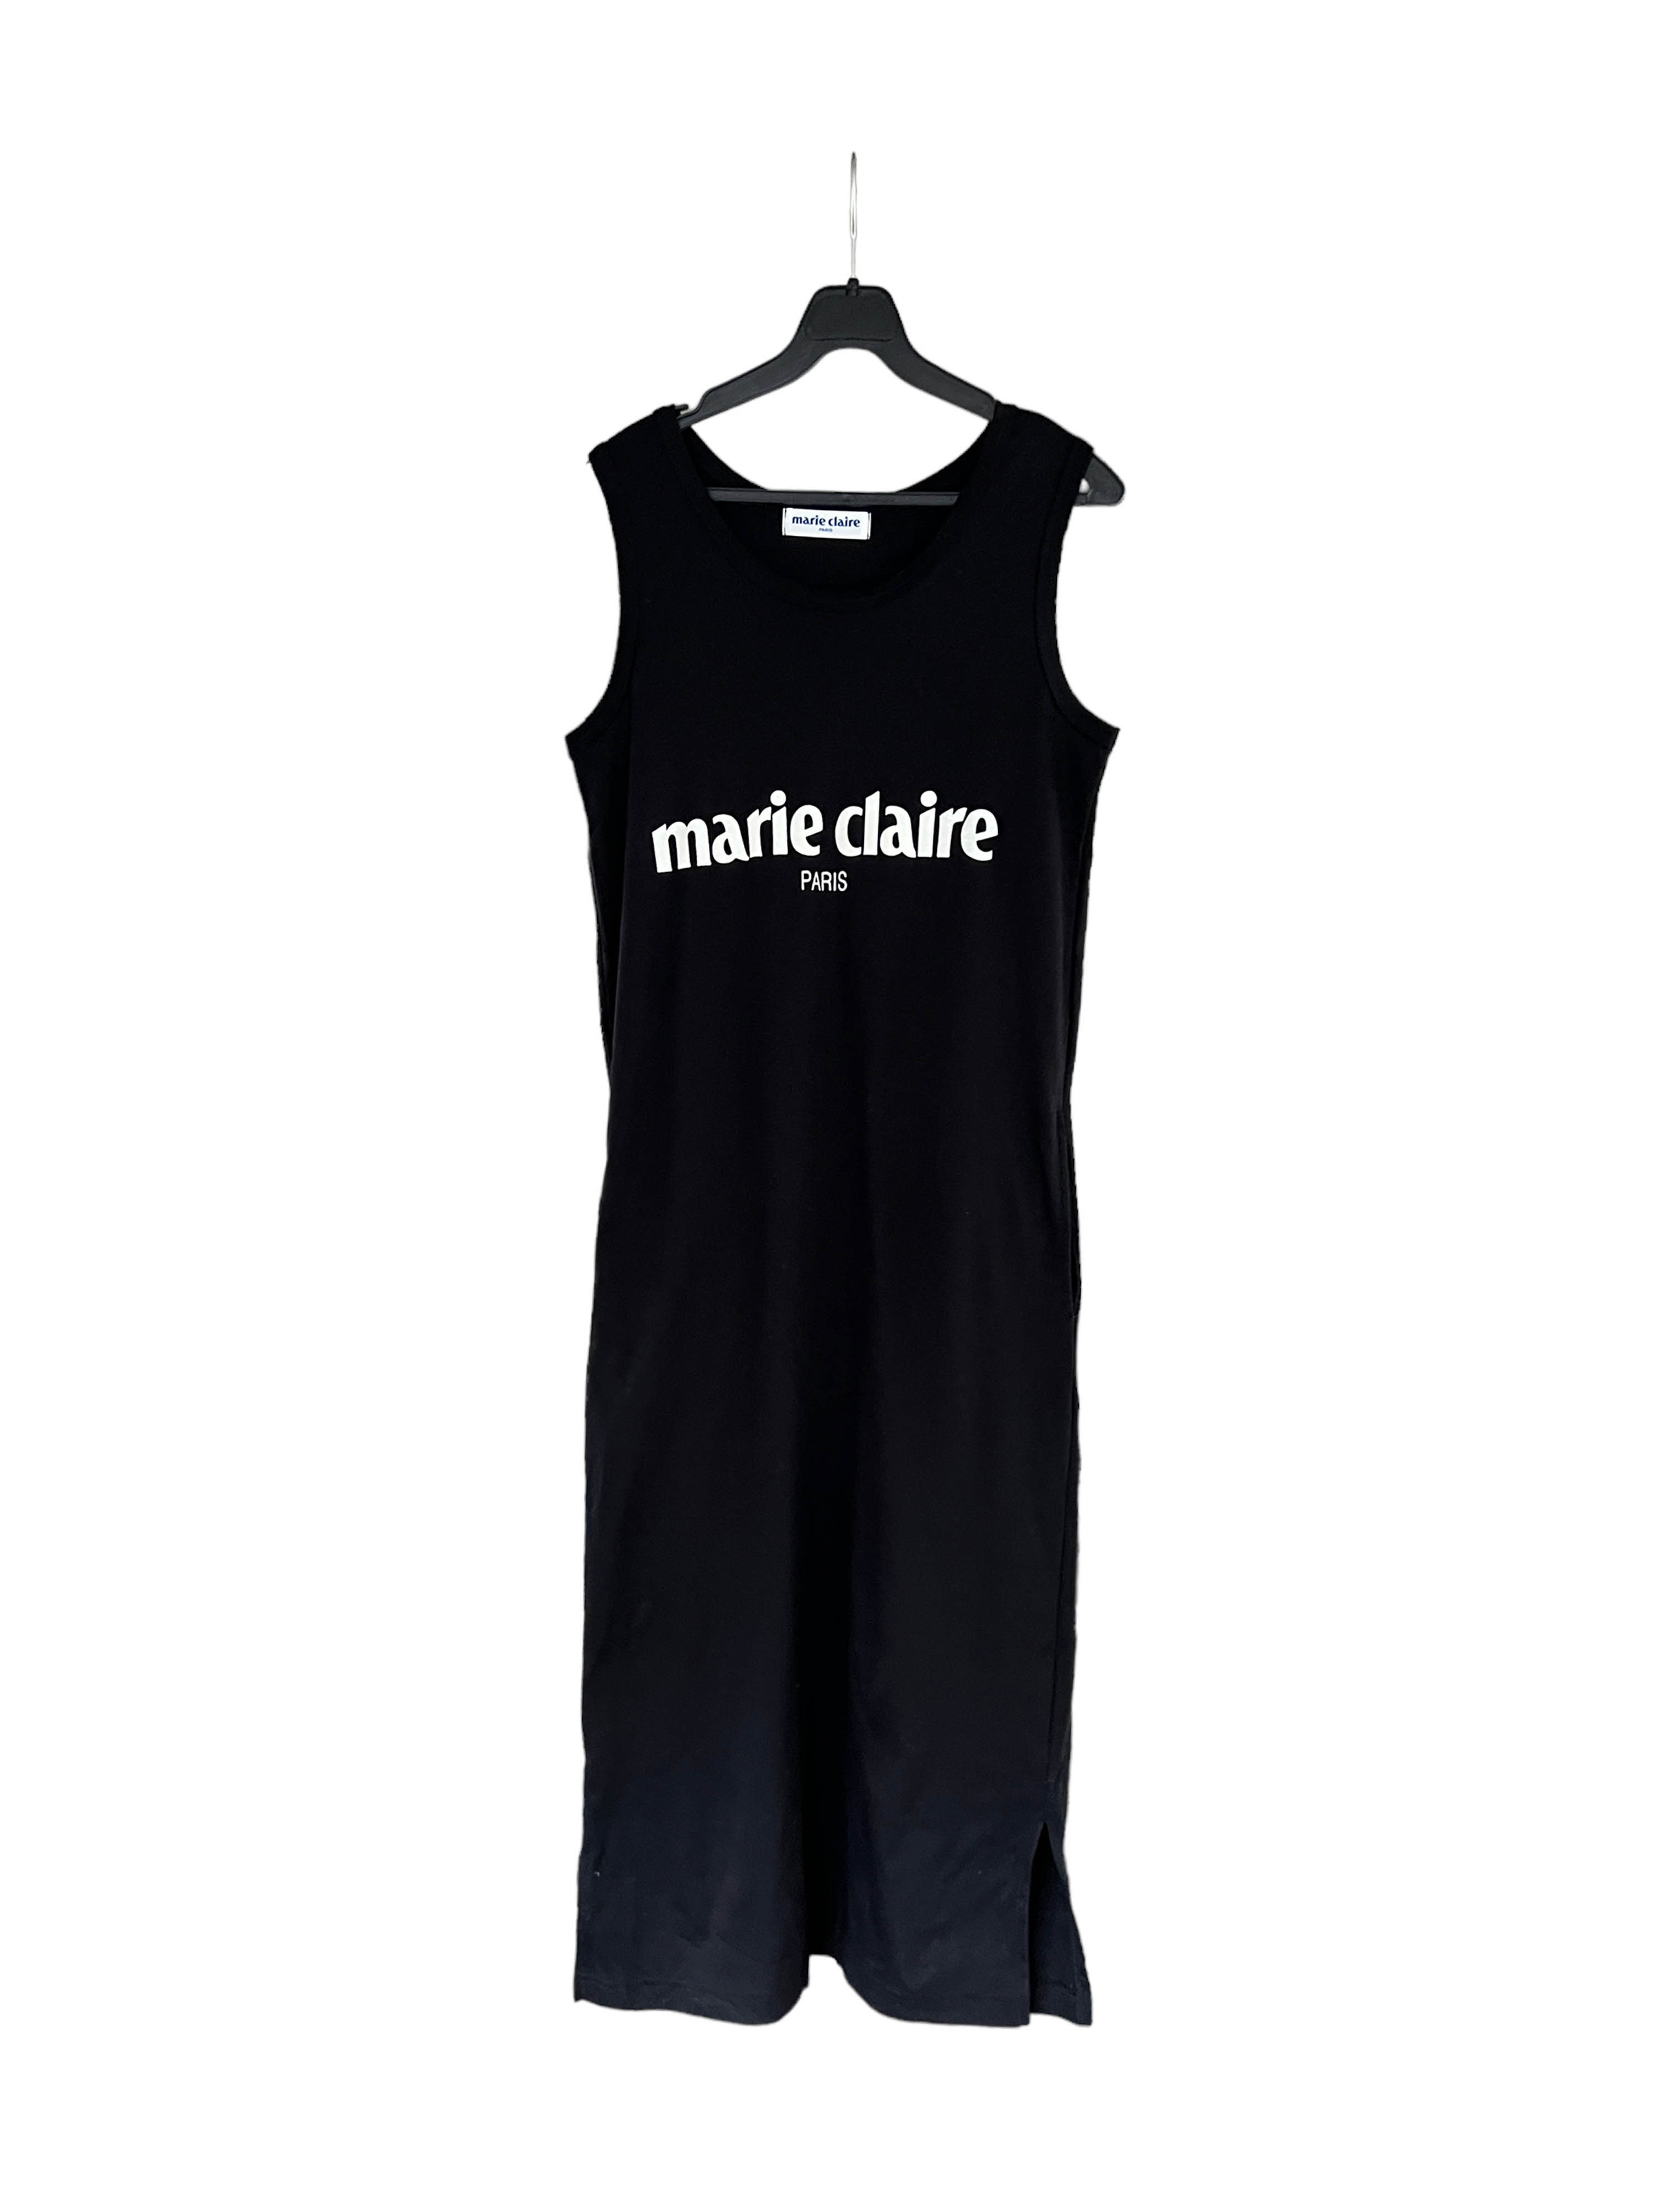 marie claire logo sleeveless onepiece